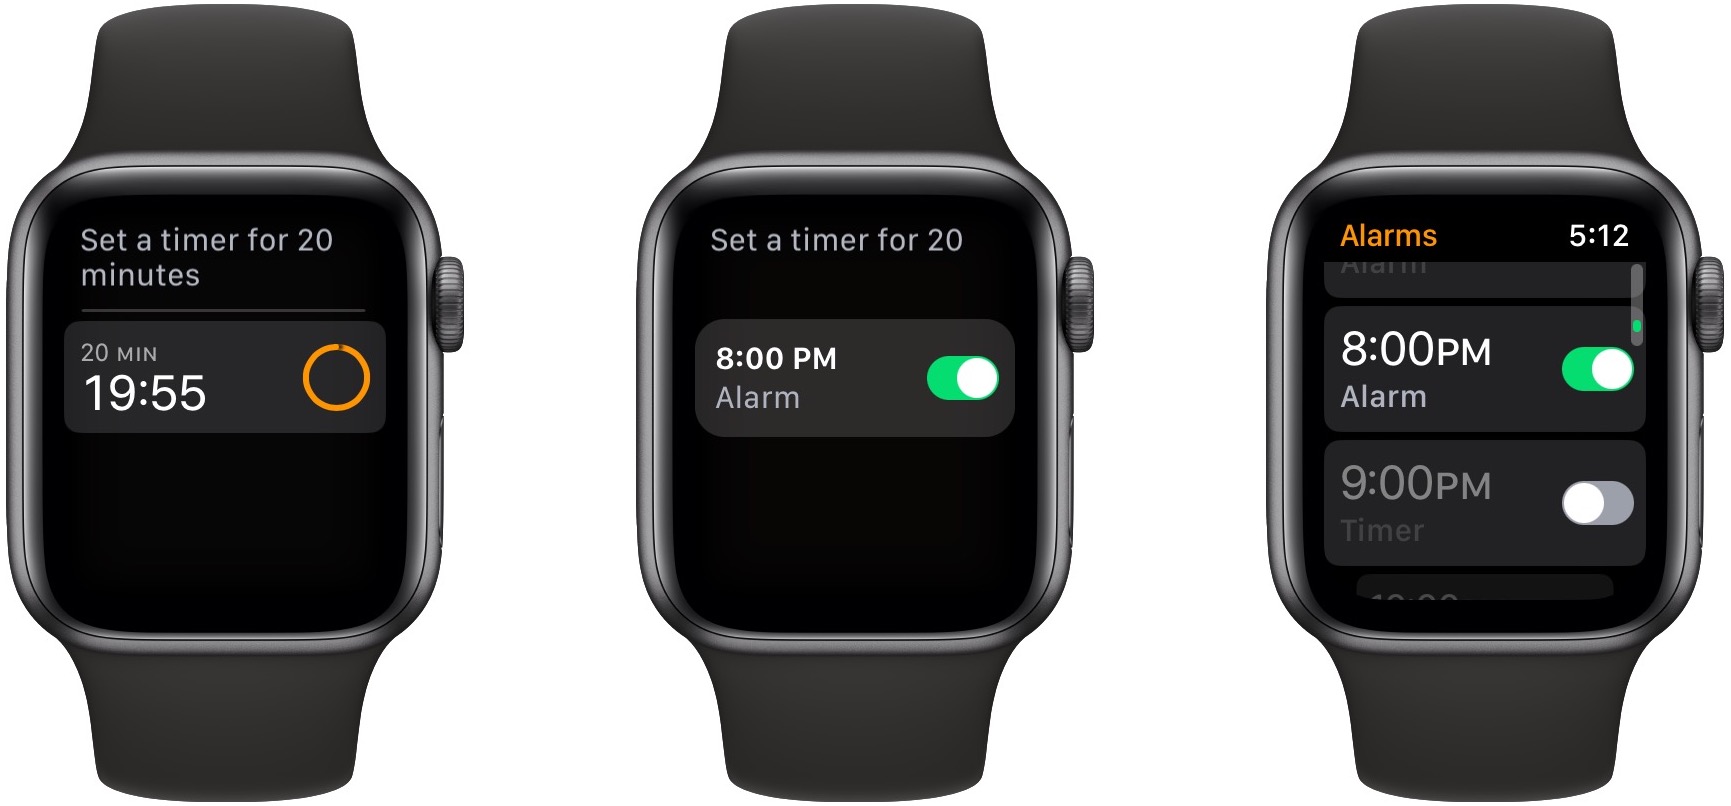 Apple Watch timer and alarms